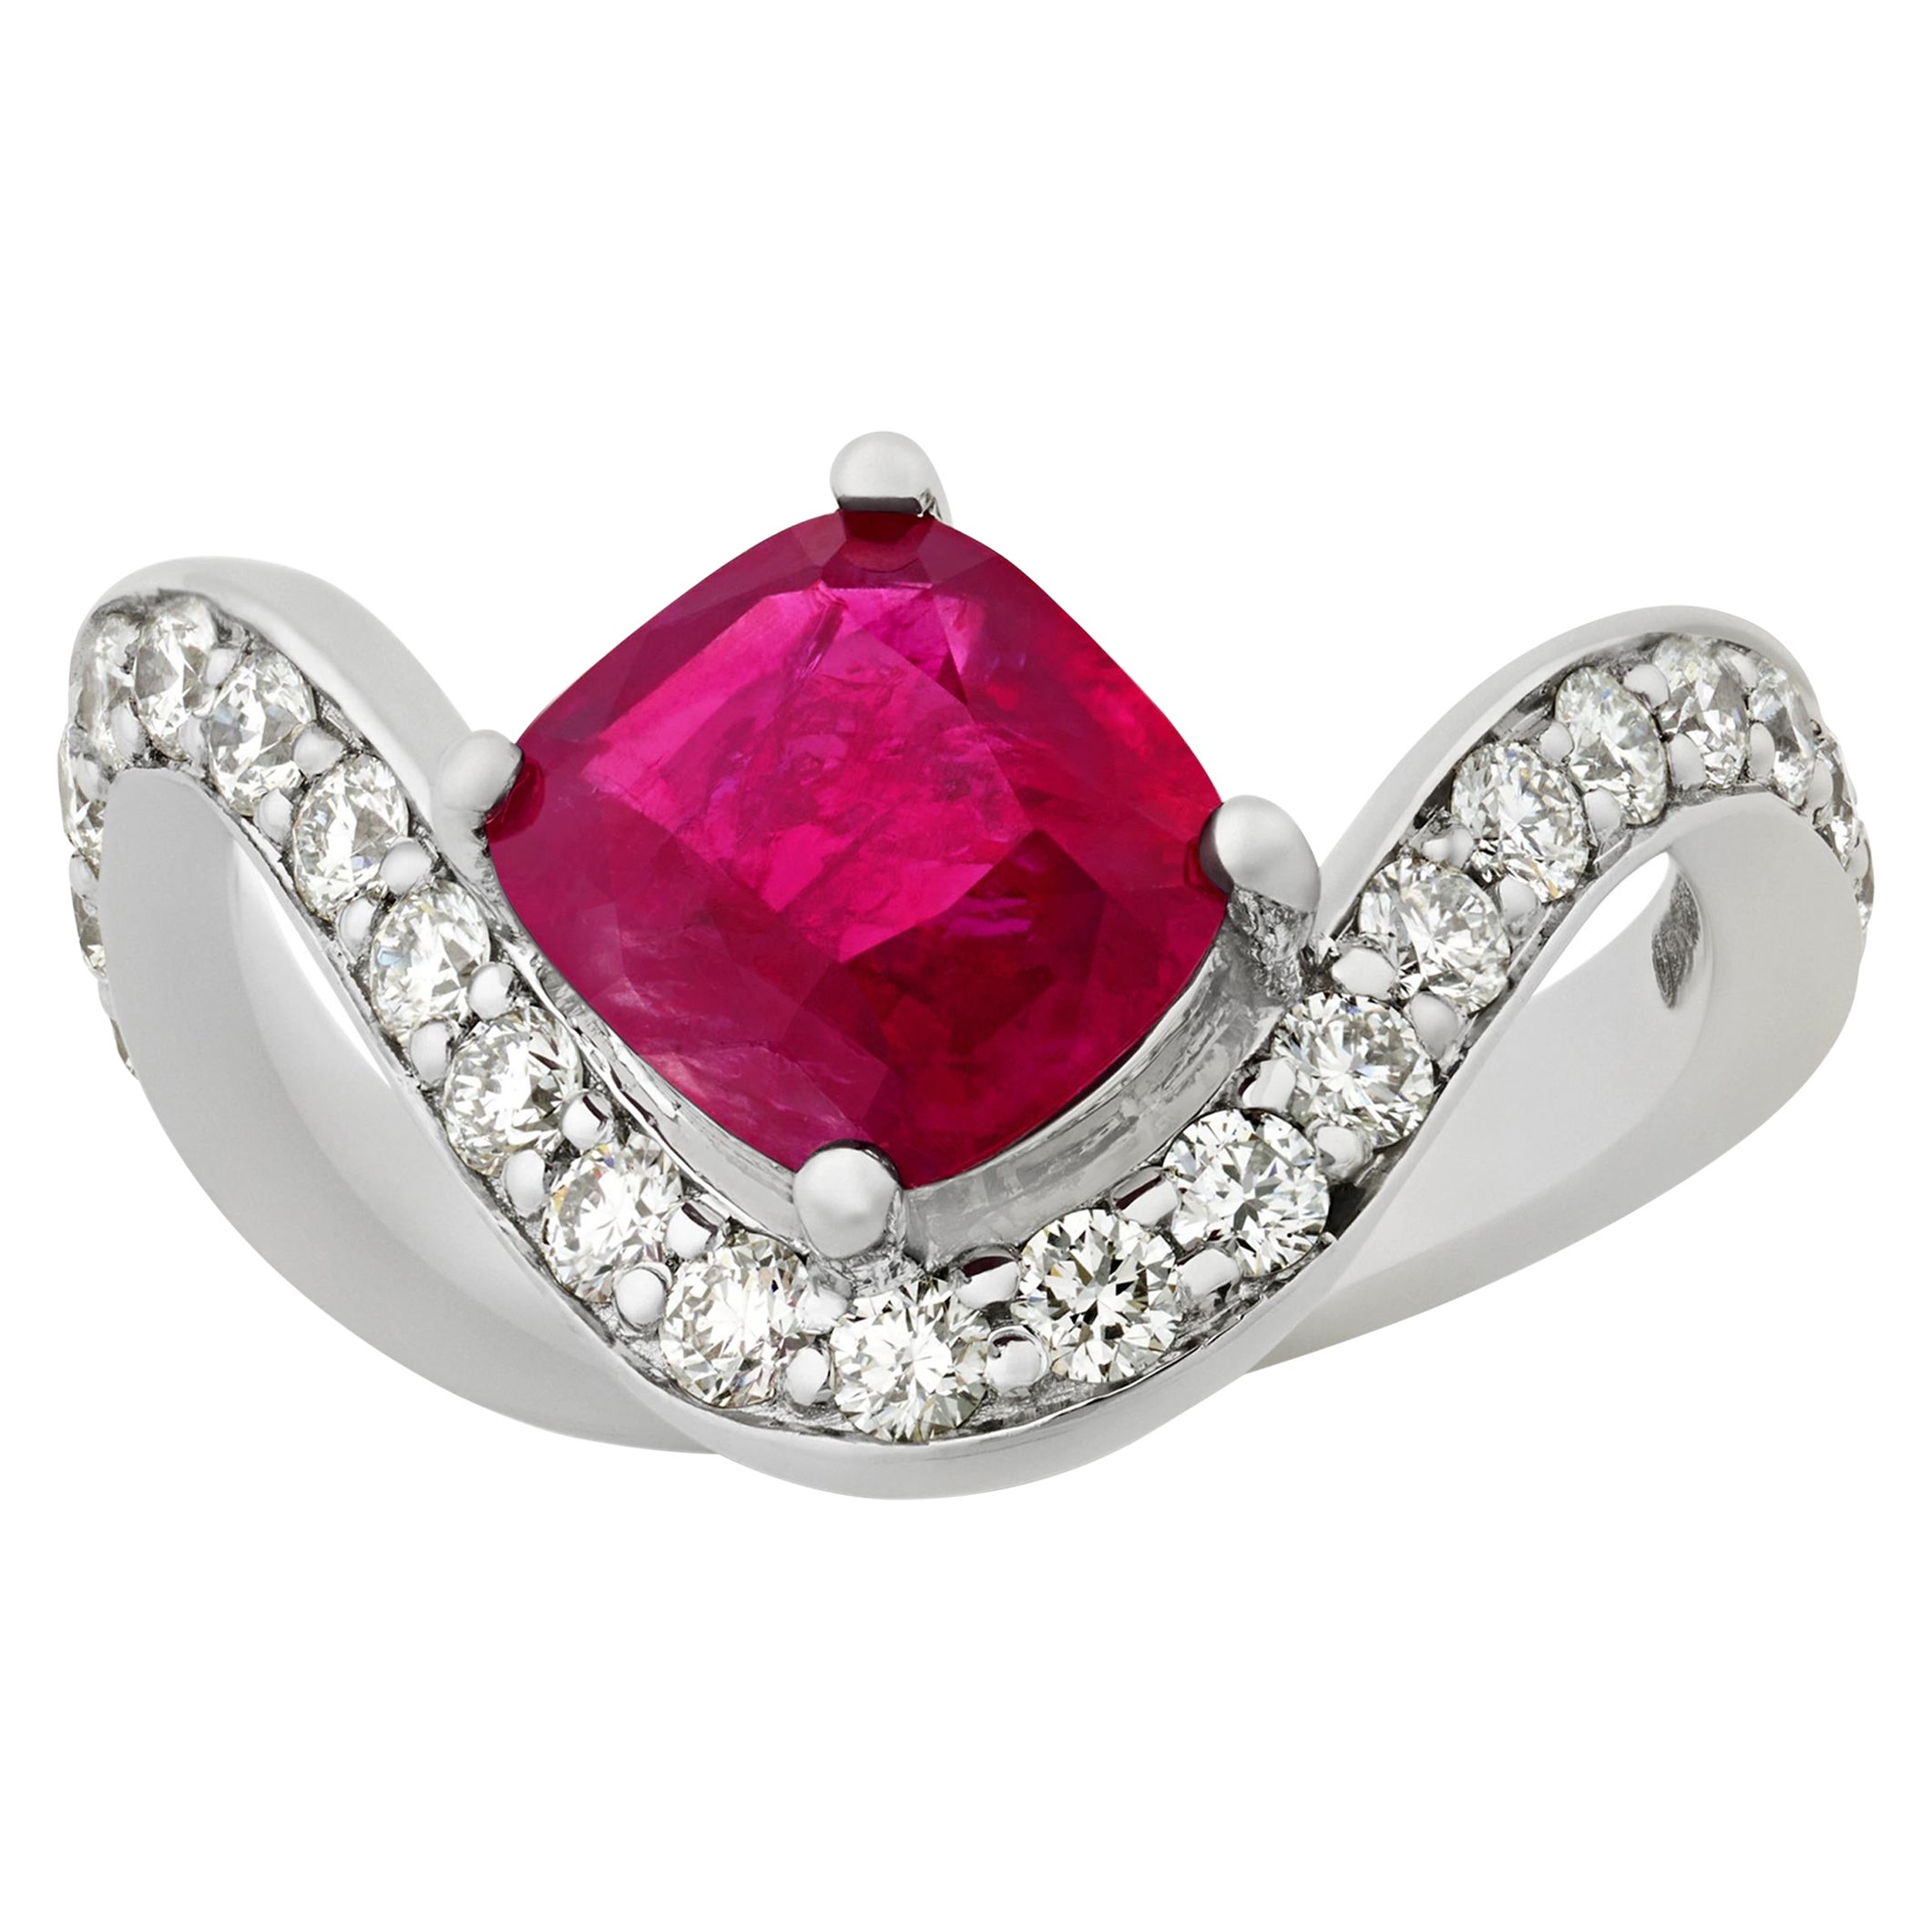 Burma Ruby Ring, 2.39 Carats For Sale